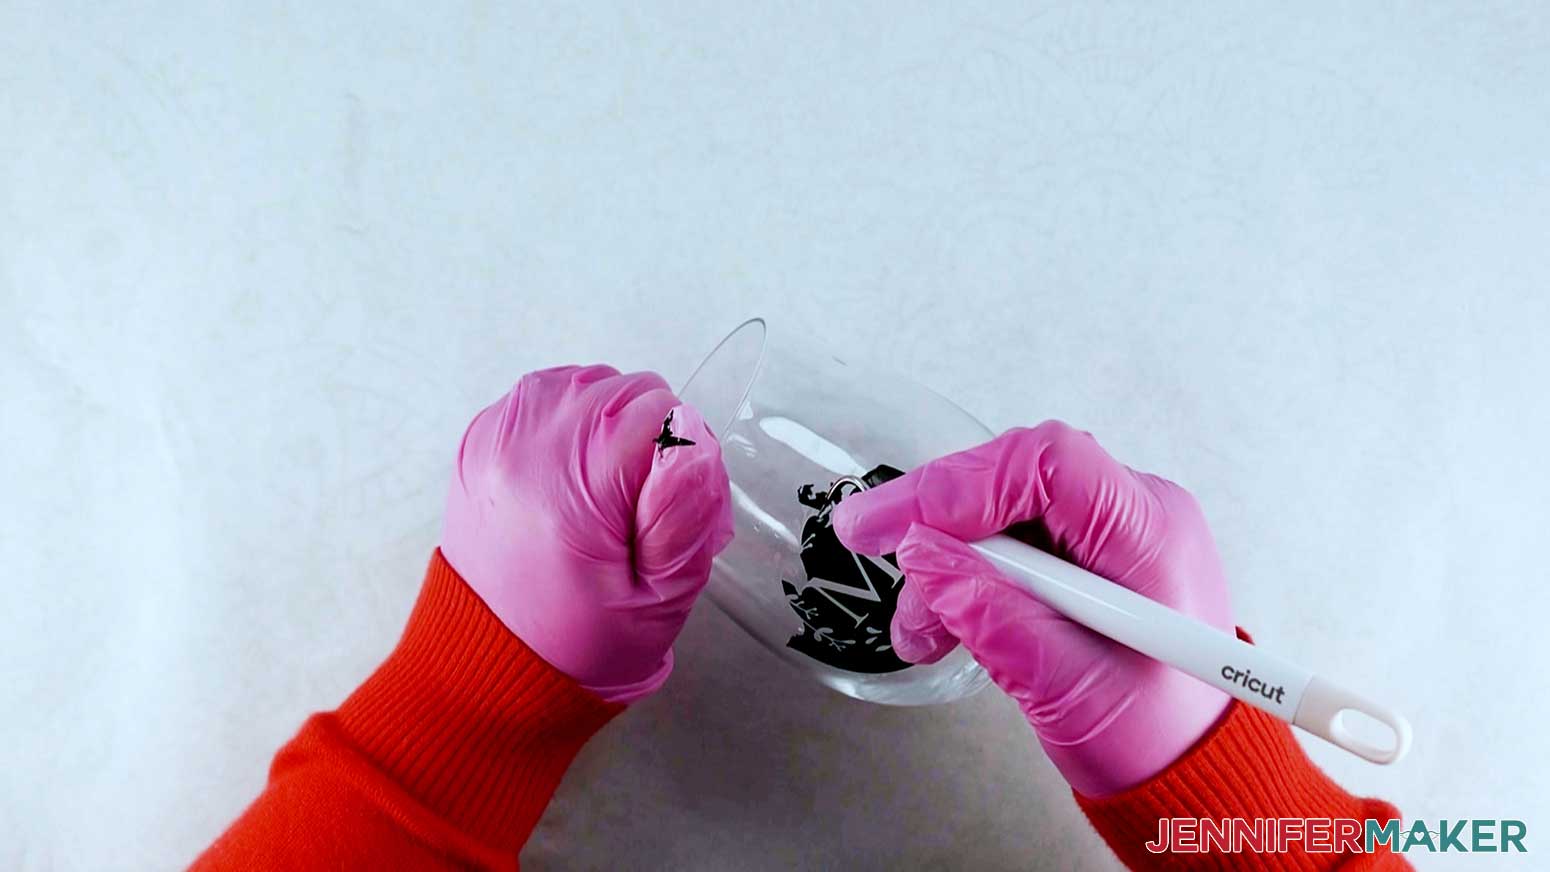 An overhead photo showing a gloved hand holding a wine glass in place while the other gloved hand uses a weeding tool to remove small pieces of vinyl to reveal the etched design on the glass